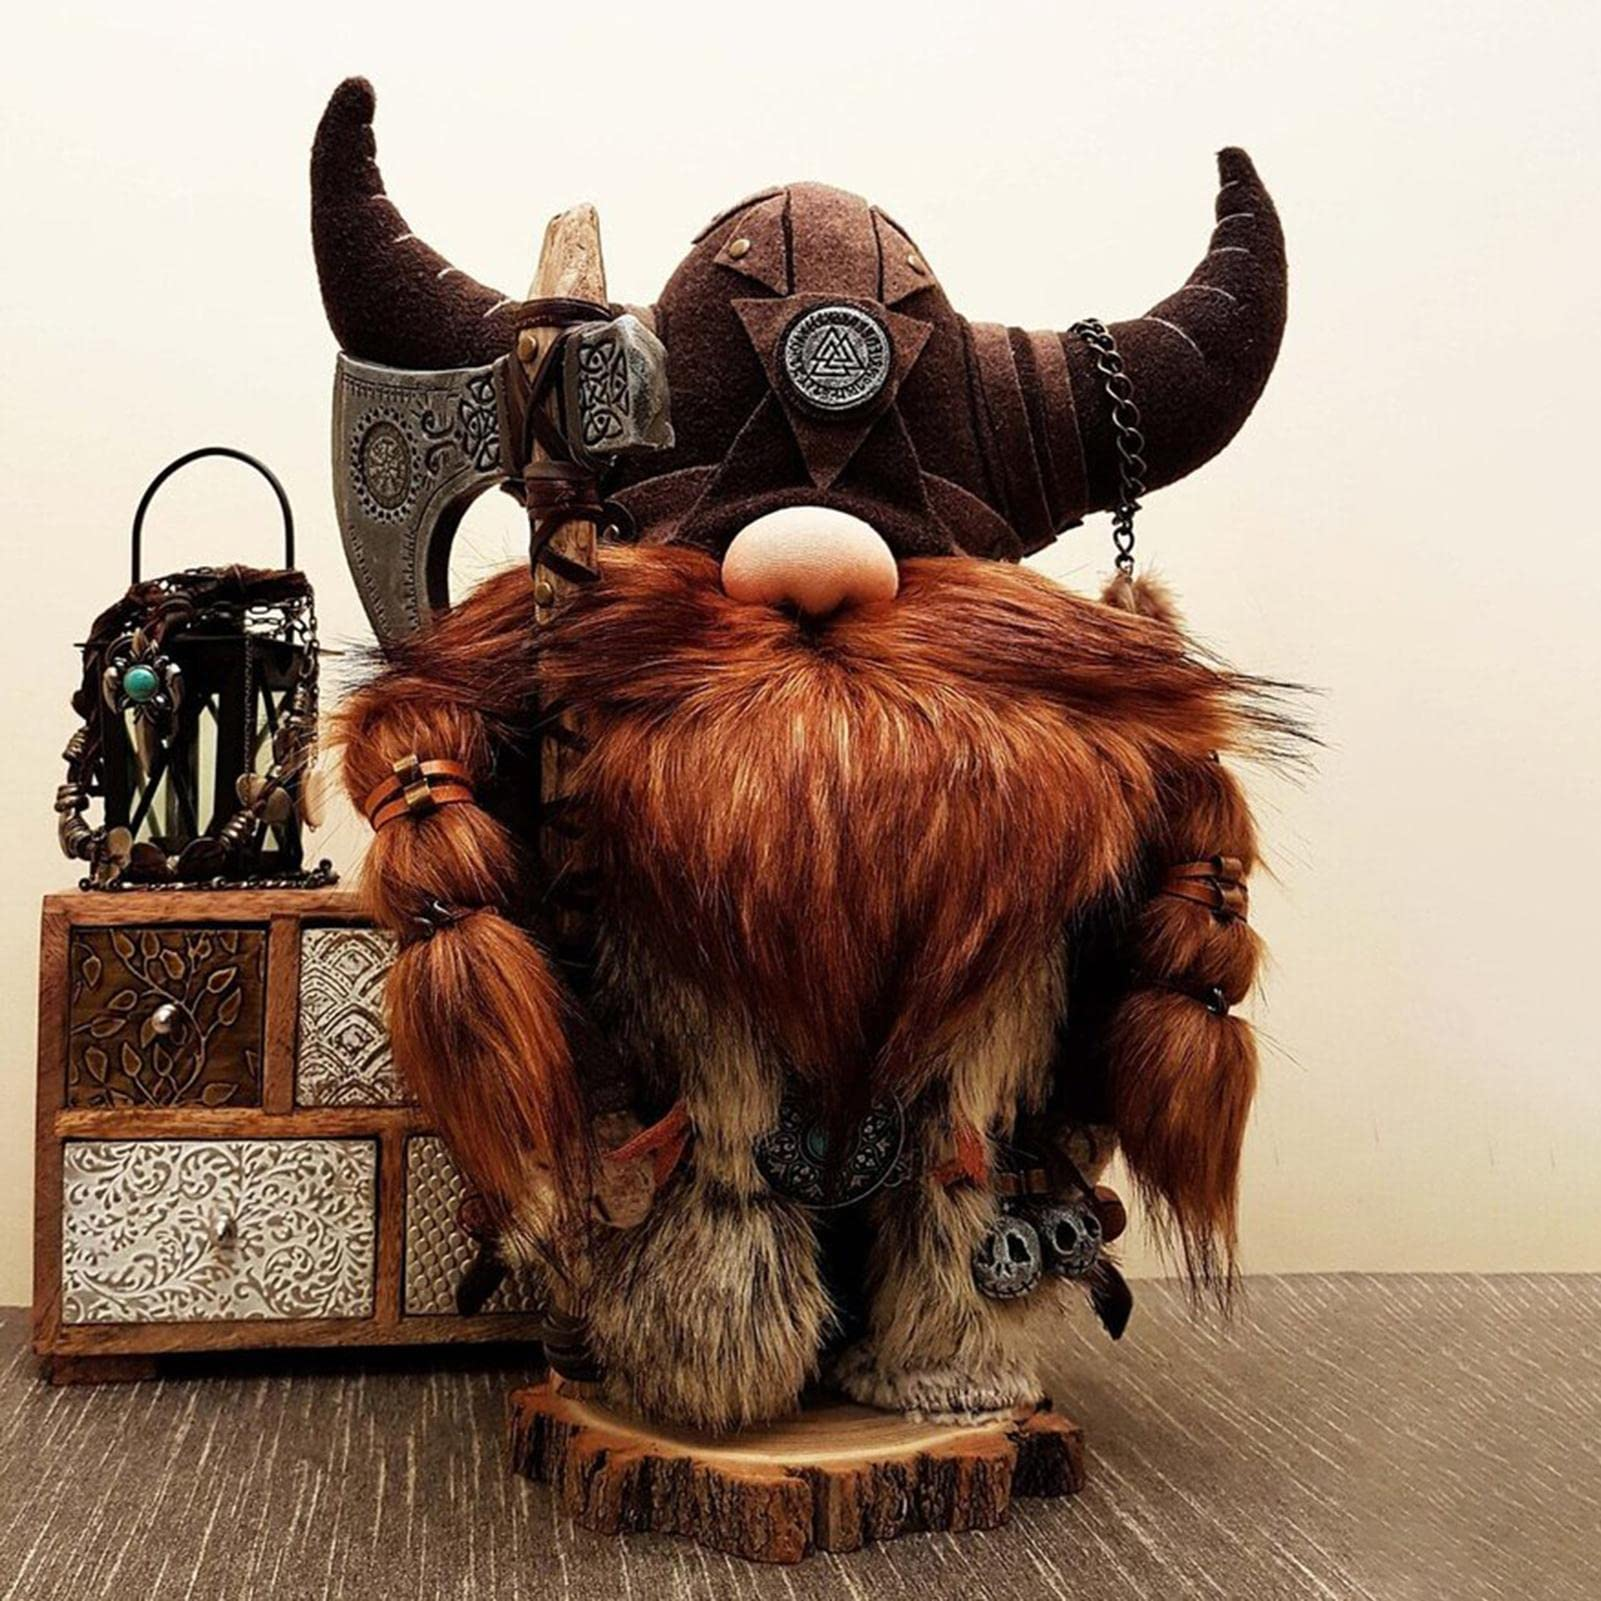 🔥SALE 49% OFF⚡ Viking Warrior Gnome Doll【BUY 2 FREE SHIPPING】